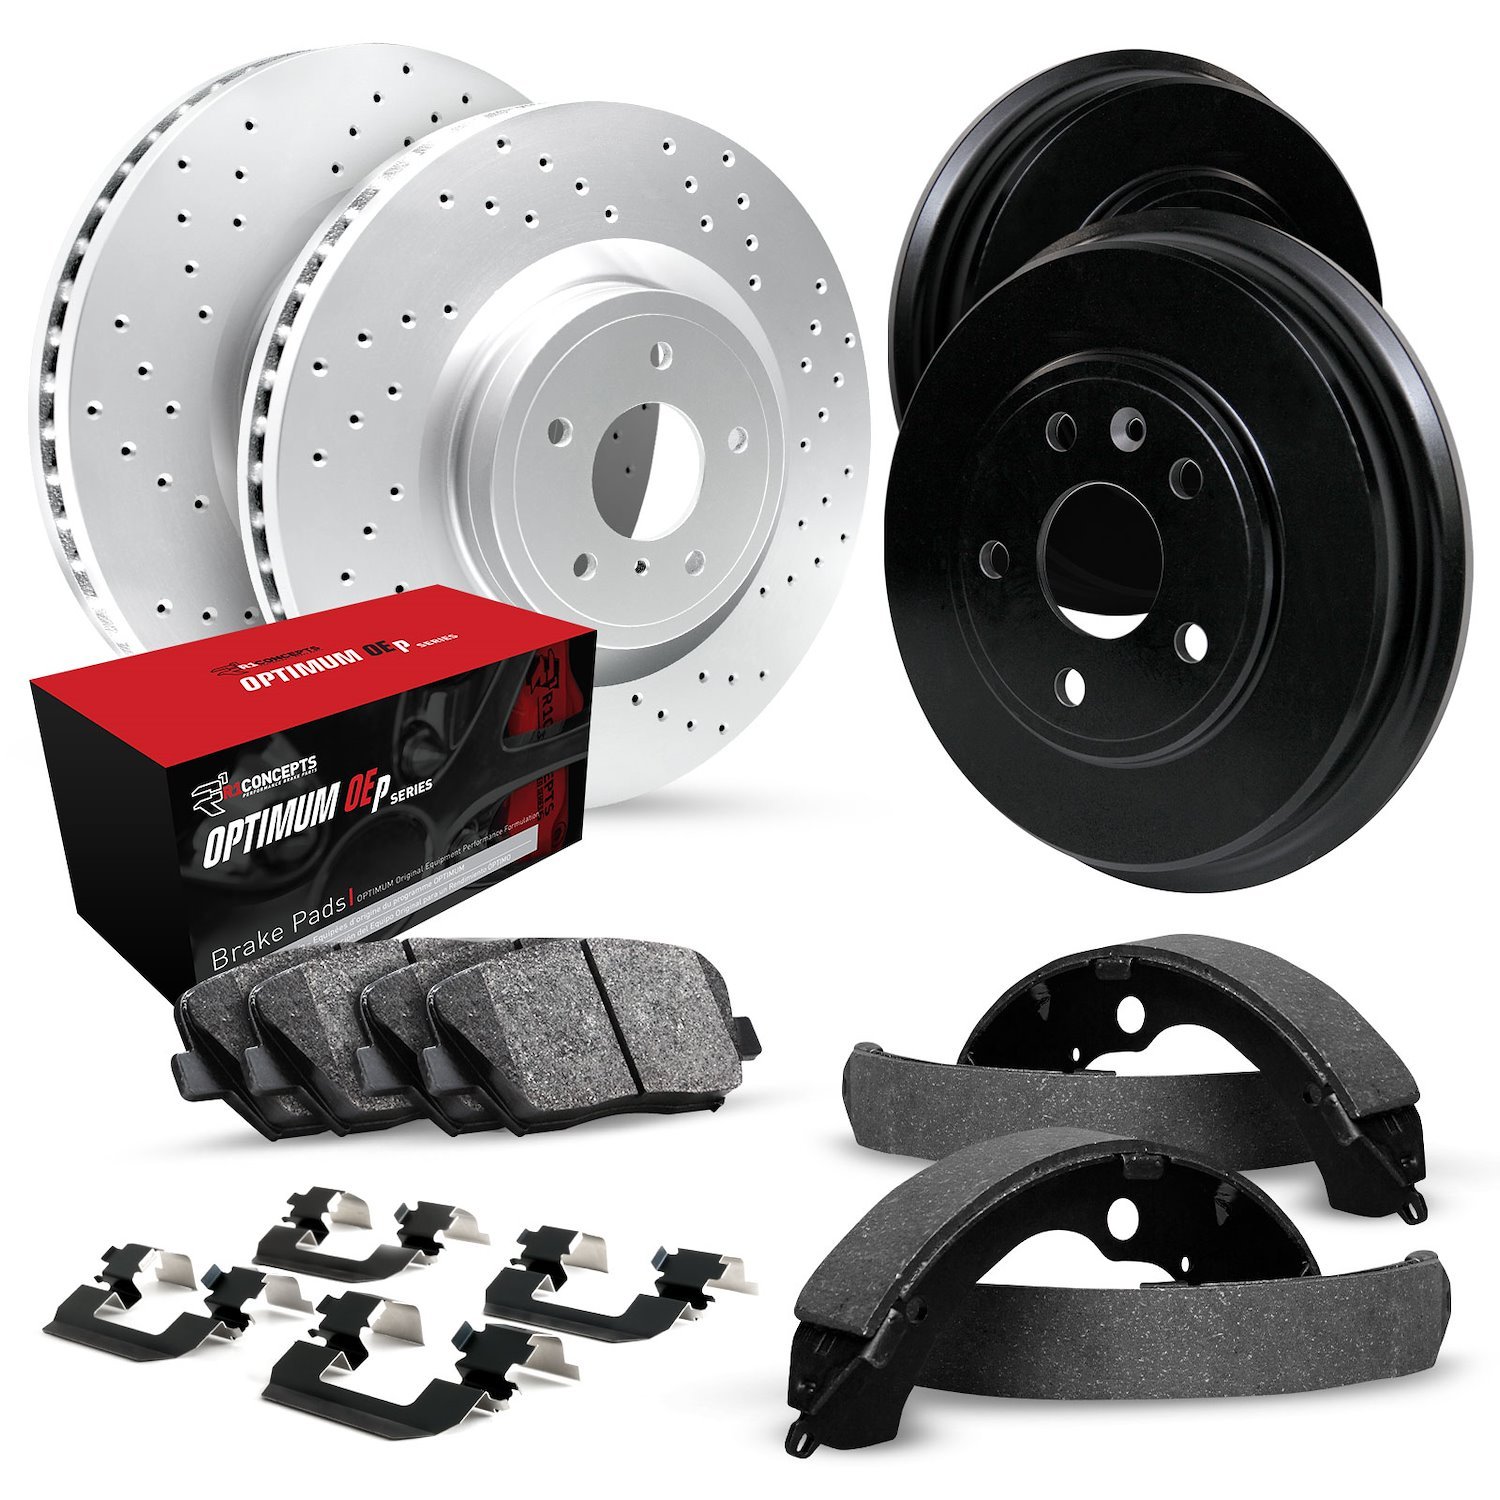 GEO-Carbon Drilled Brake Rotor & Drum Set w/Optimum OE Pads, Shoes, & Hardware, 1971-1971 GM, Position: Front & Rear